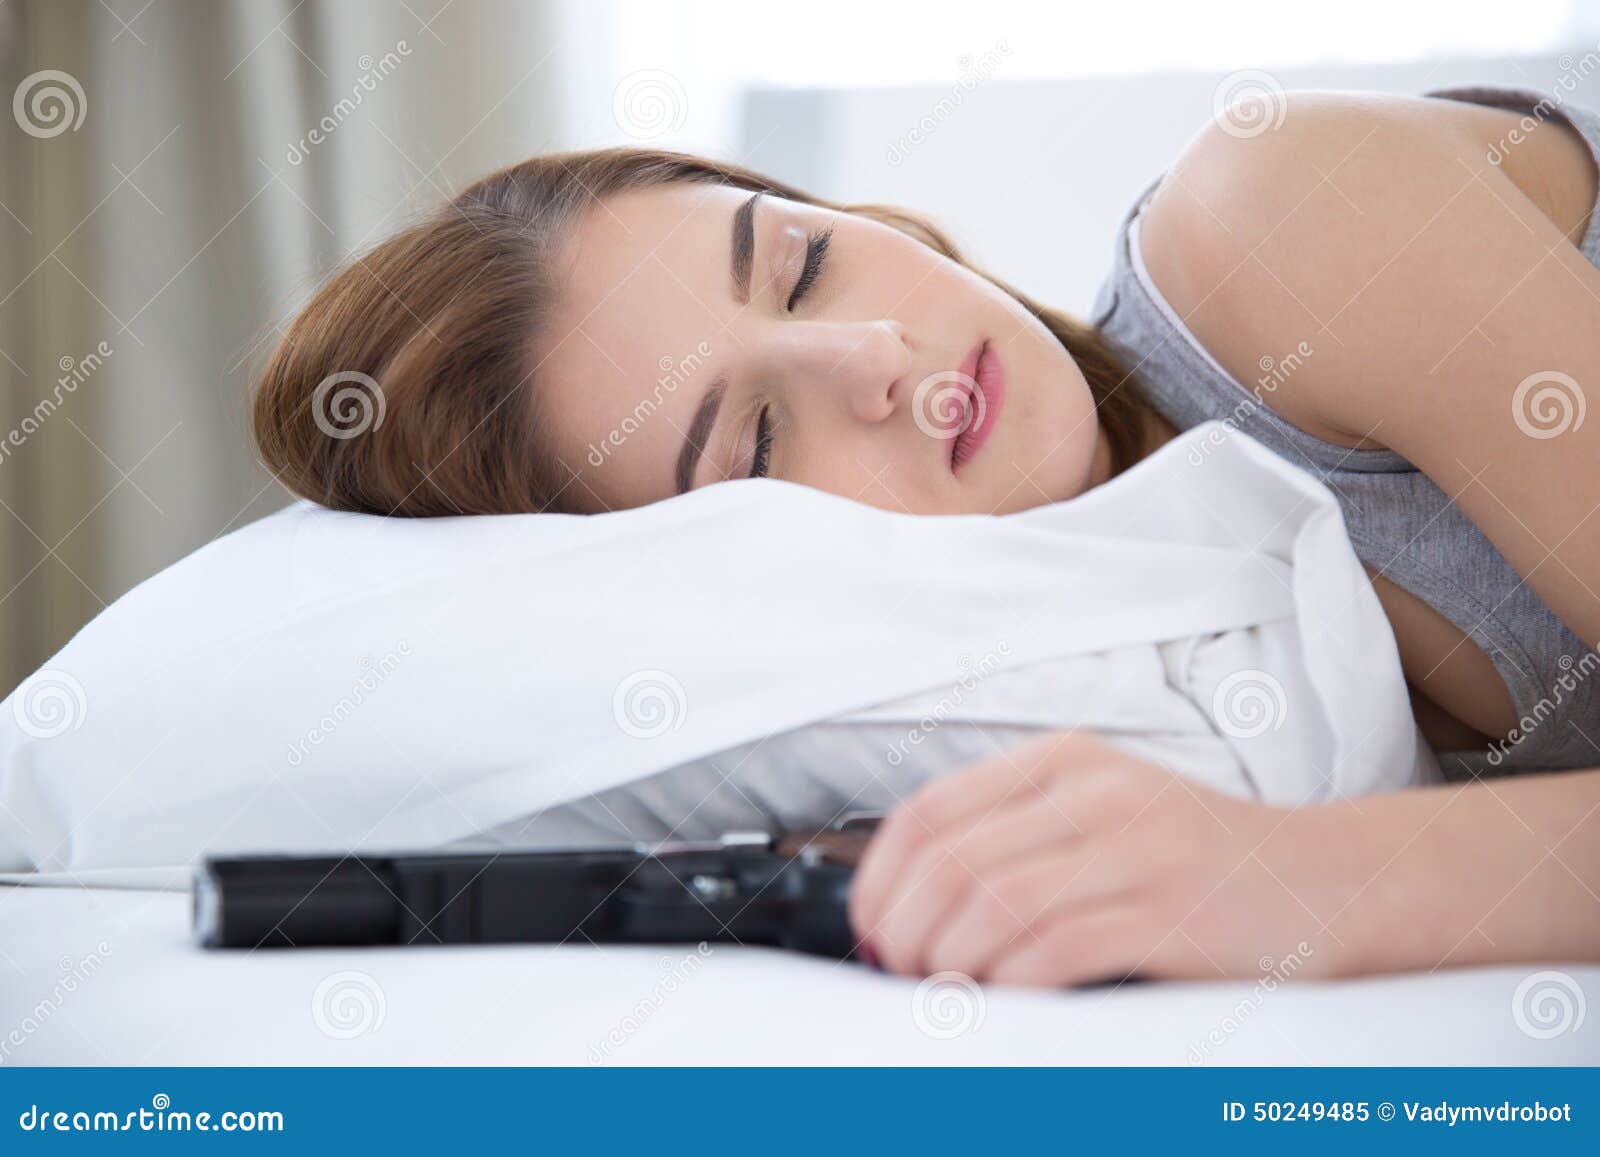 Woman in Bed Sleeps with Hand on Gun Weapon Stock Image Image of bear